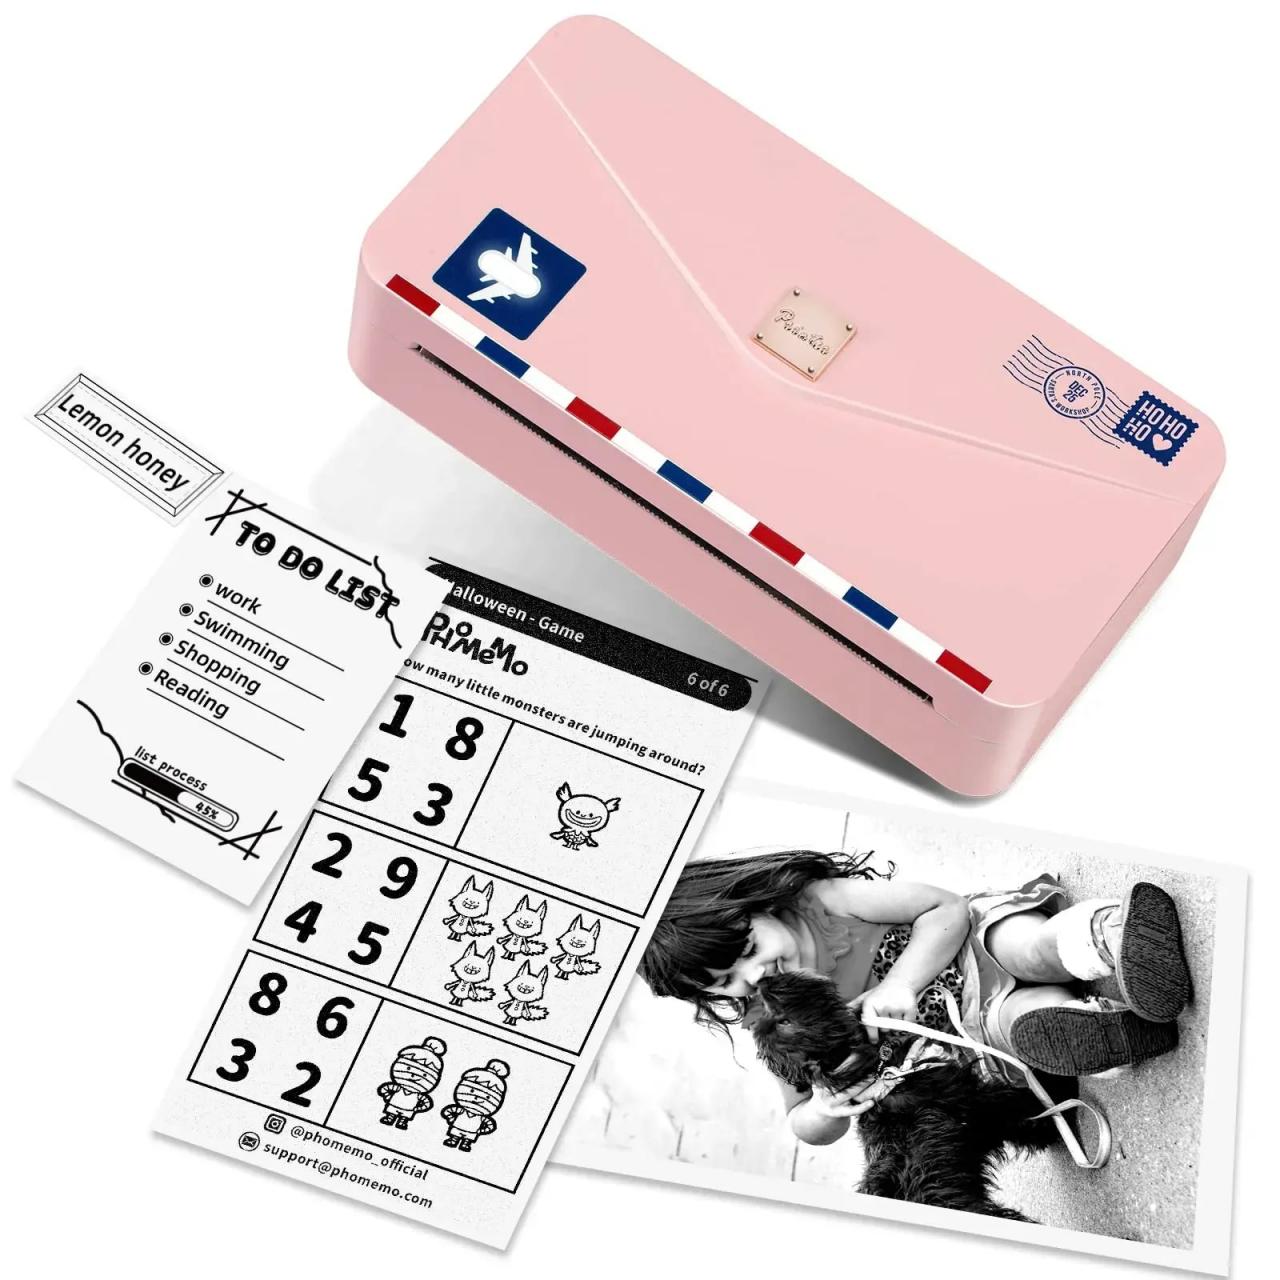 Compact Pink Thermal Printer Bundle With Paper And Cable